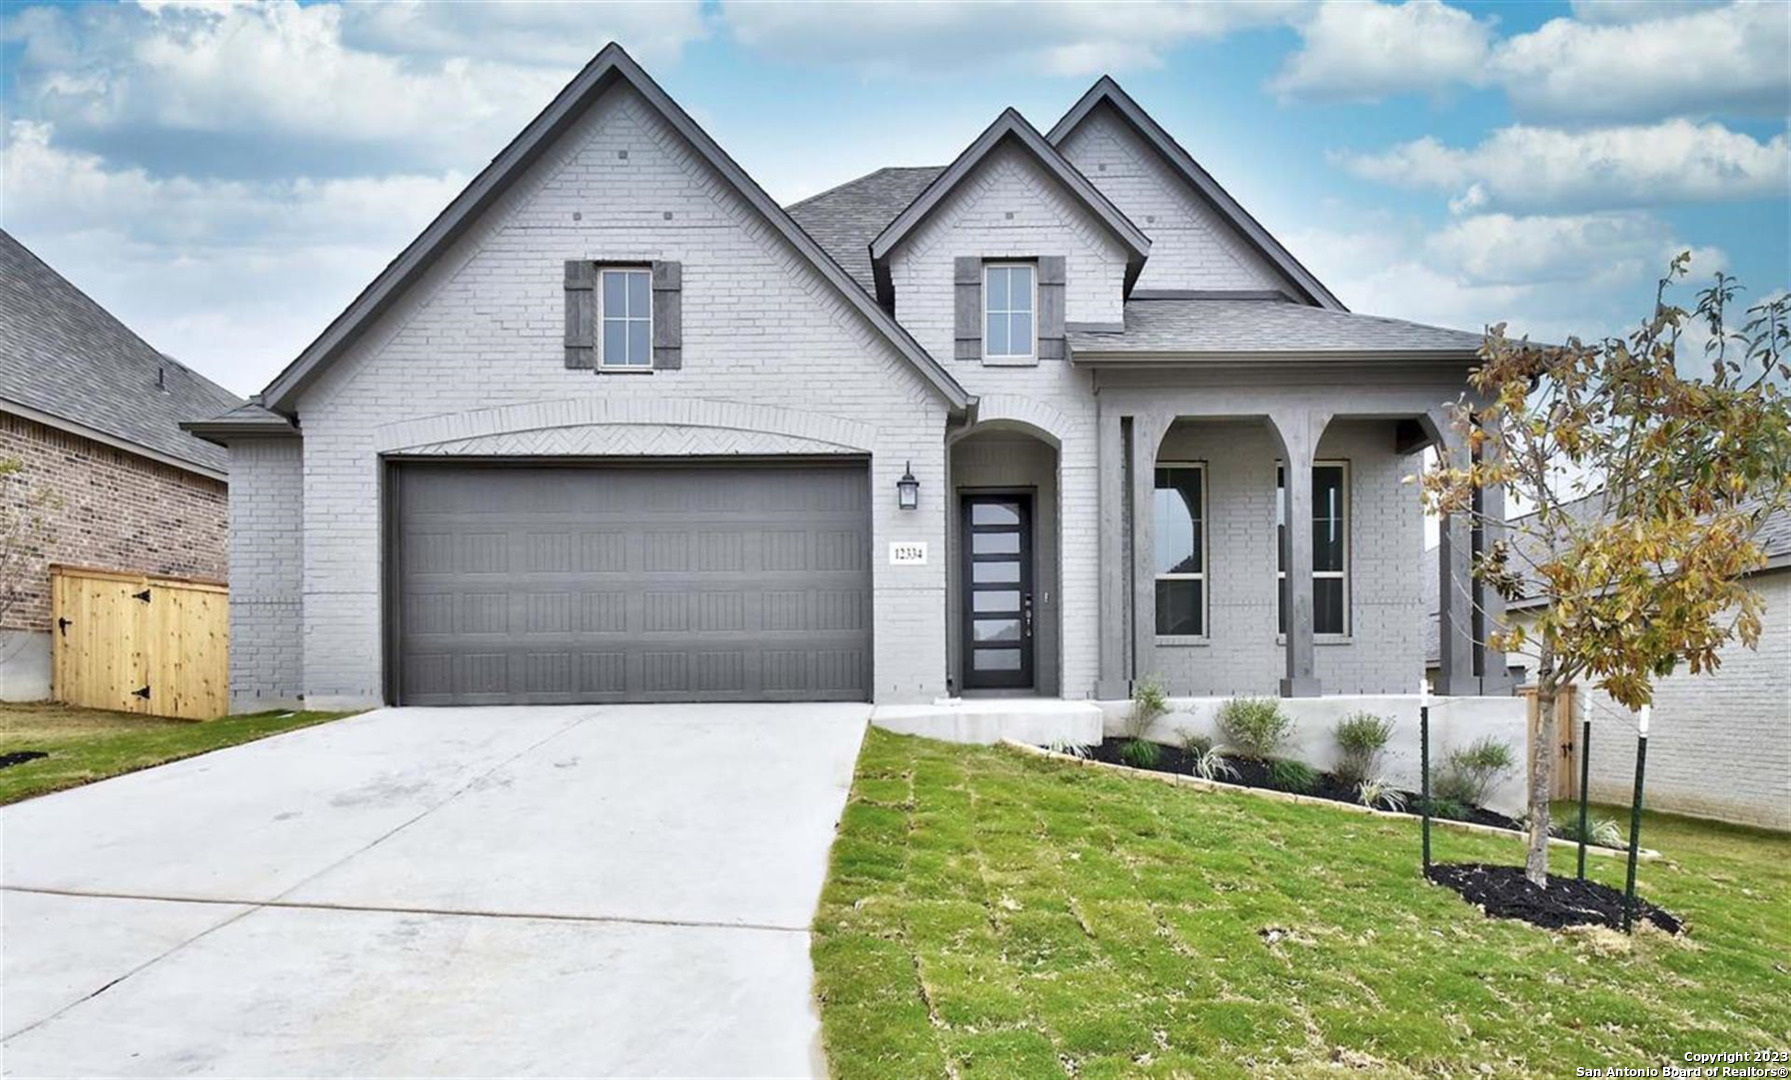 MLS# 1599805 - Built by Highland Homes - CONST. COMPLETED Nov 15 ~ This ONE level brick home boasts 12' ceilings, open floorplan, white and gray interior palette with white cabinets and porcelain tile floors, large breakfast-dining with 5 windows and very large family room.